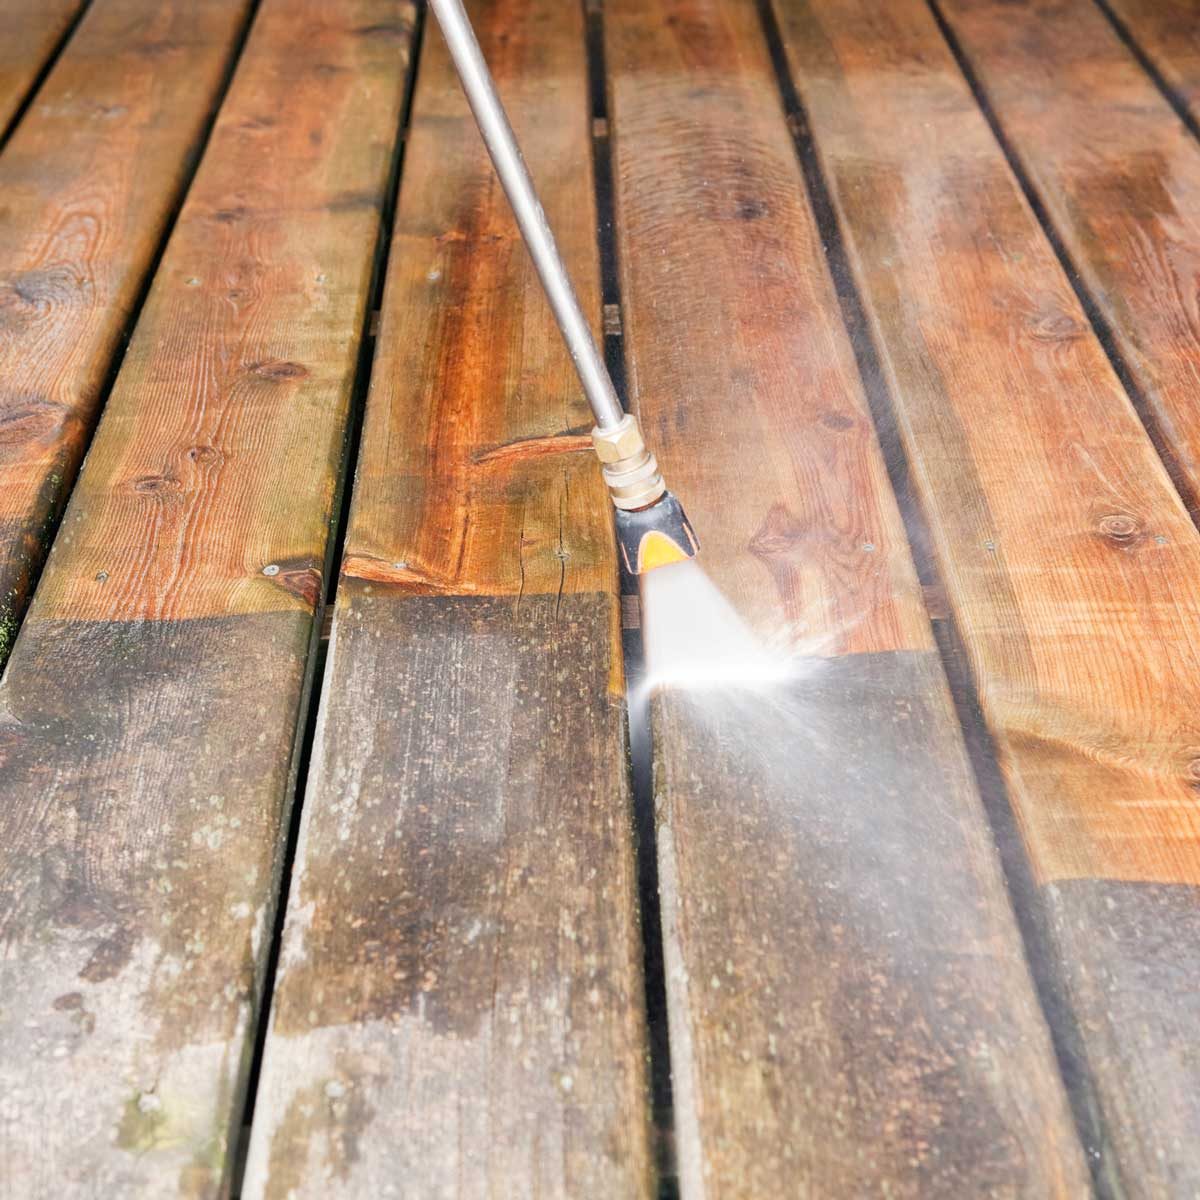 Mccoys Deck Cleaning